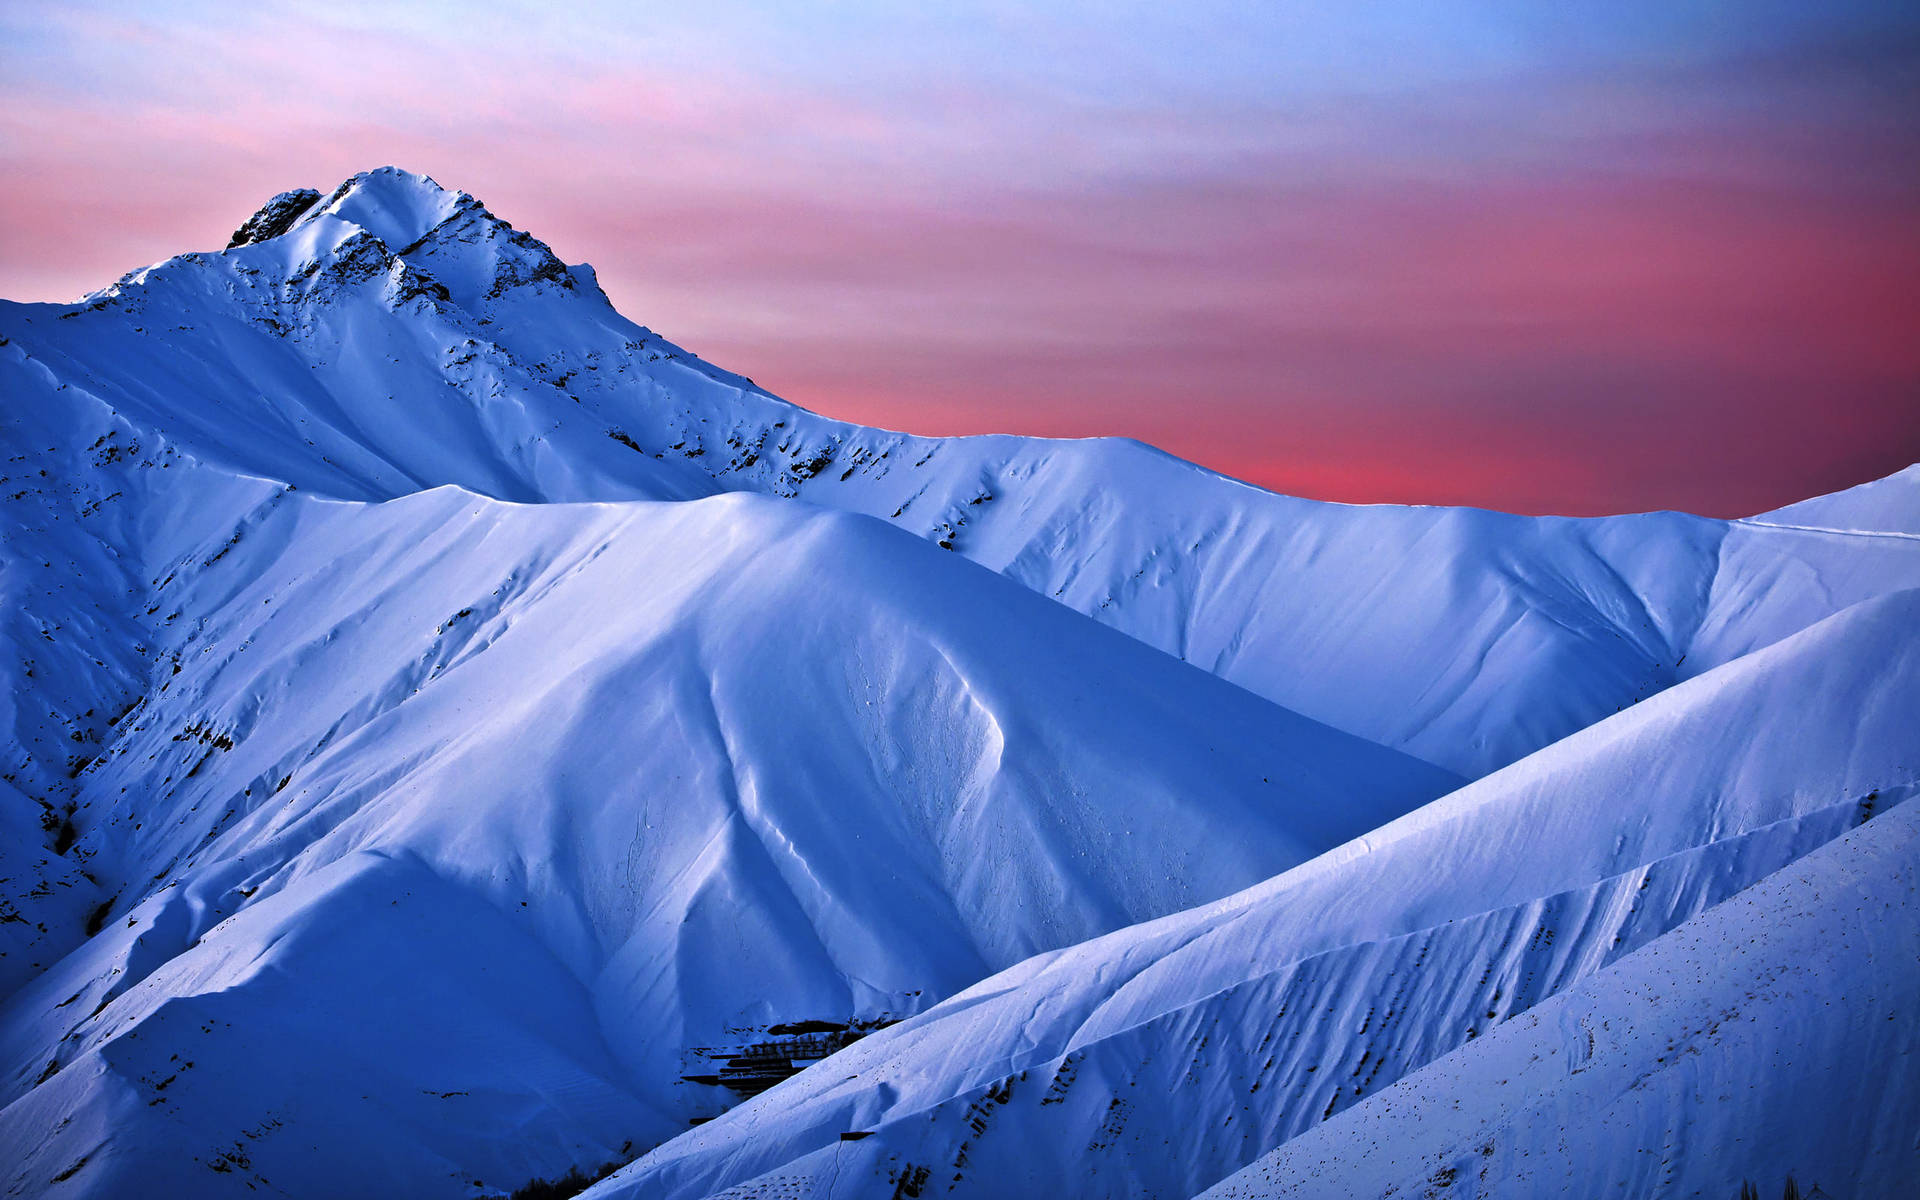 Snow Mountain And Pink Sky Background